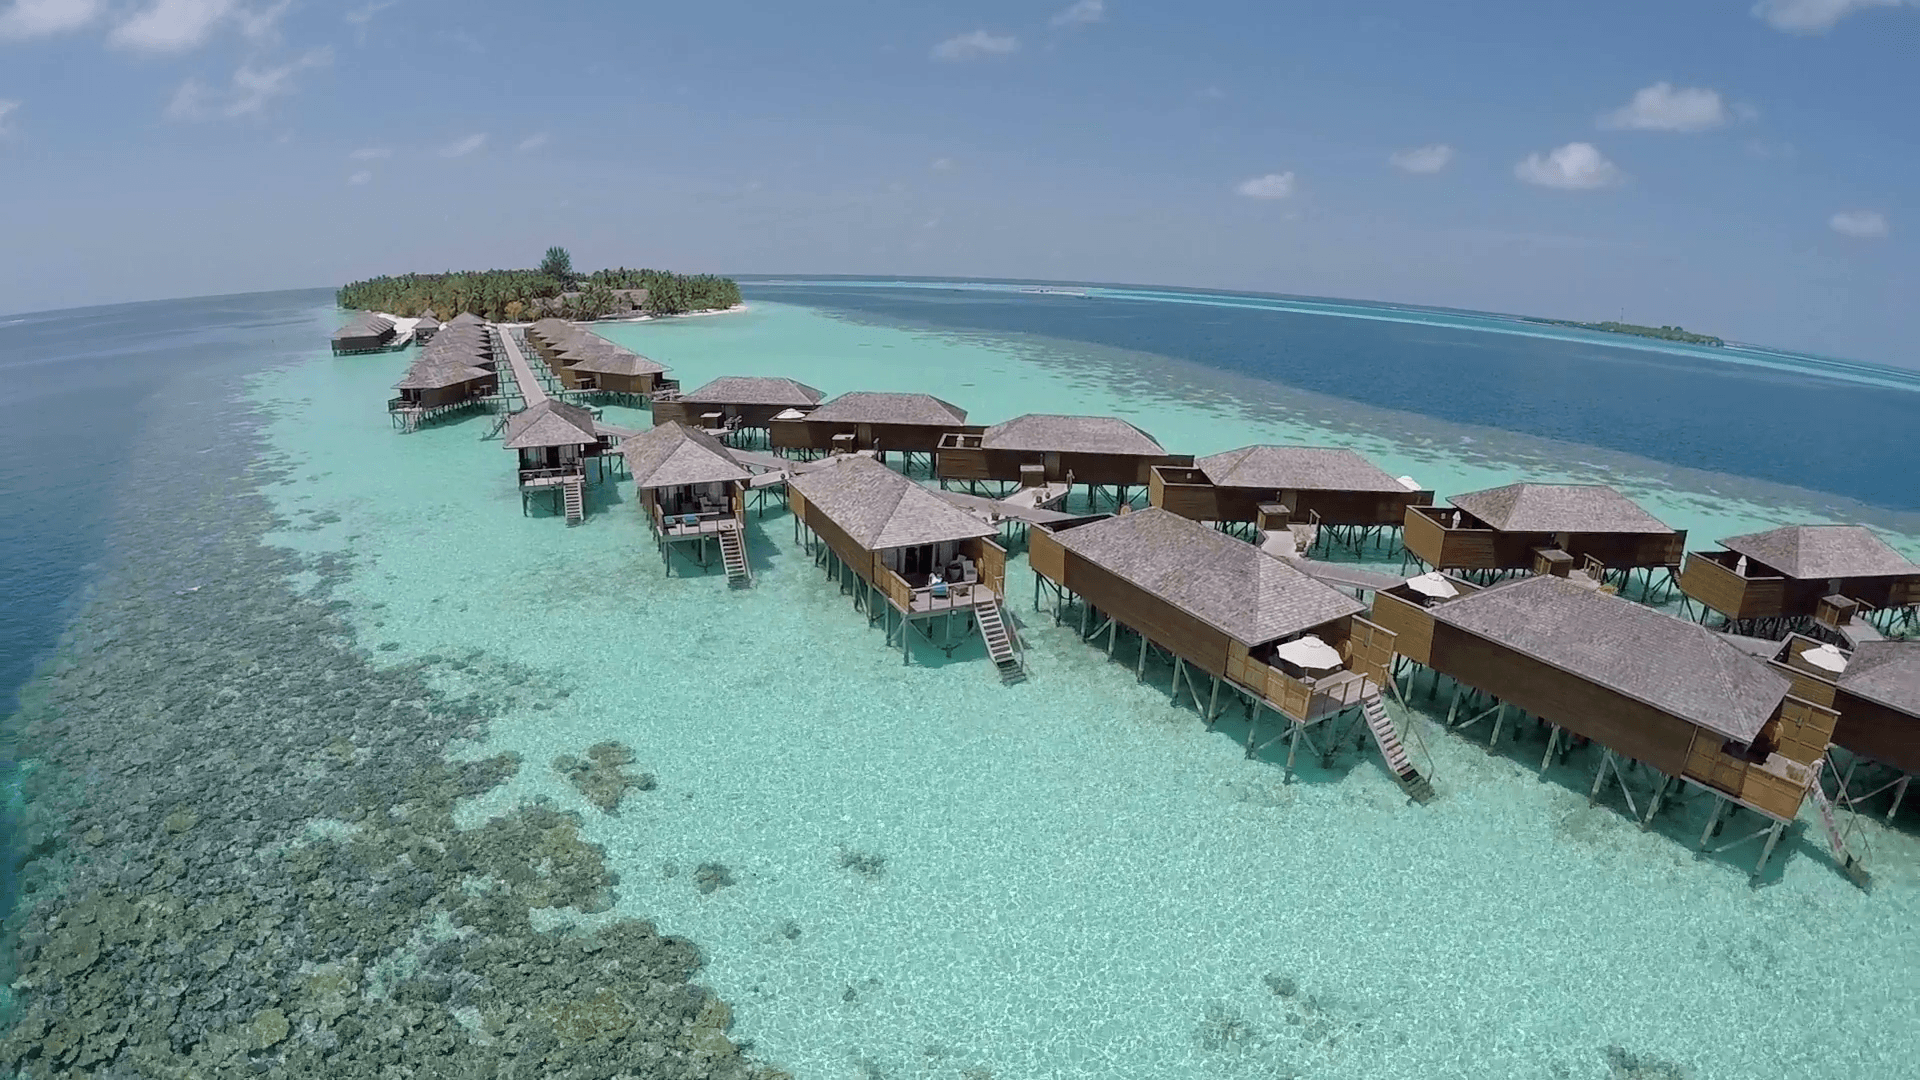 AERIAL: Luxurious Over Water Villas On Tropical Island Resort